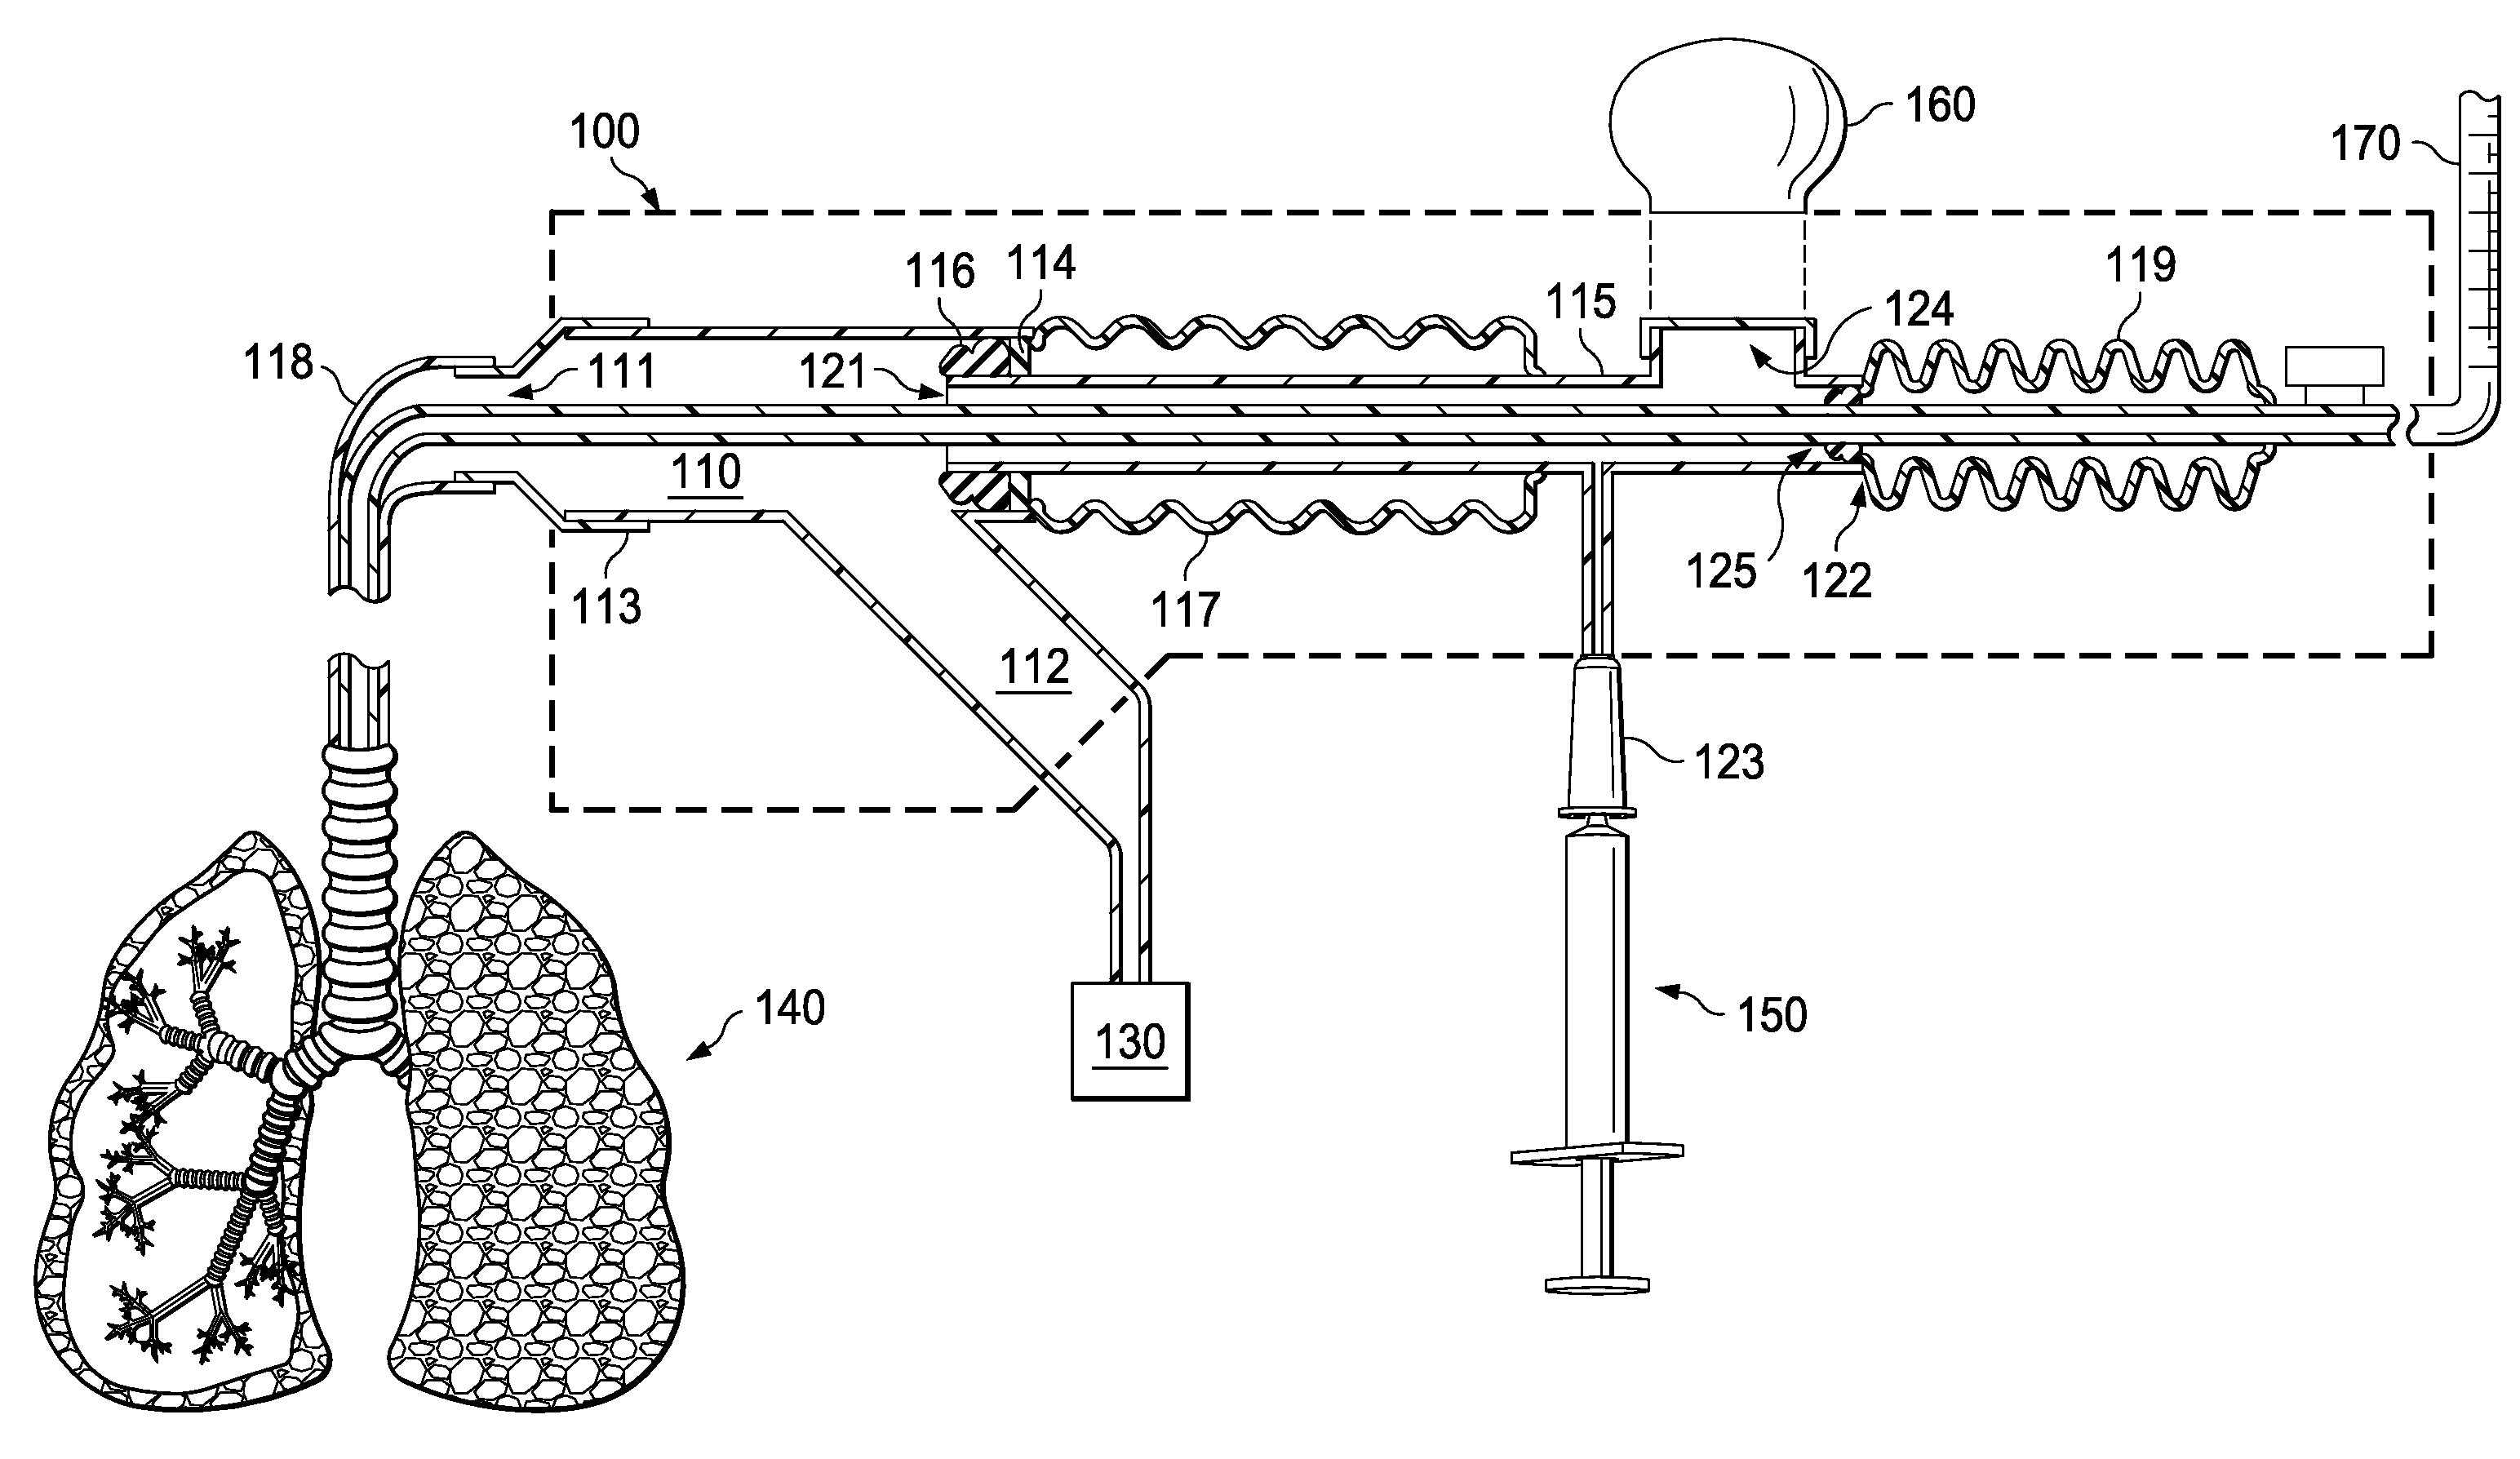 Device for secretion removal, manual ventilation and determination of in vivo lung mechanics without circuit disconnection